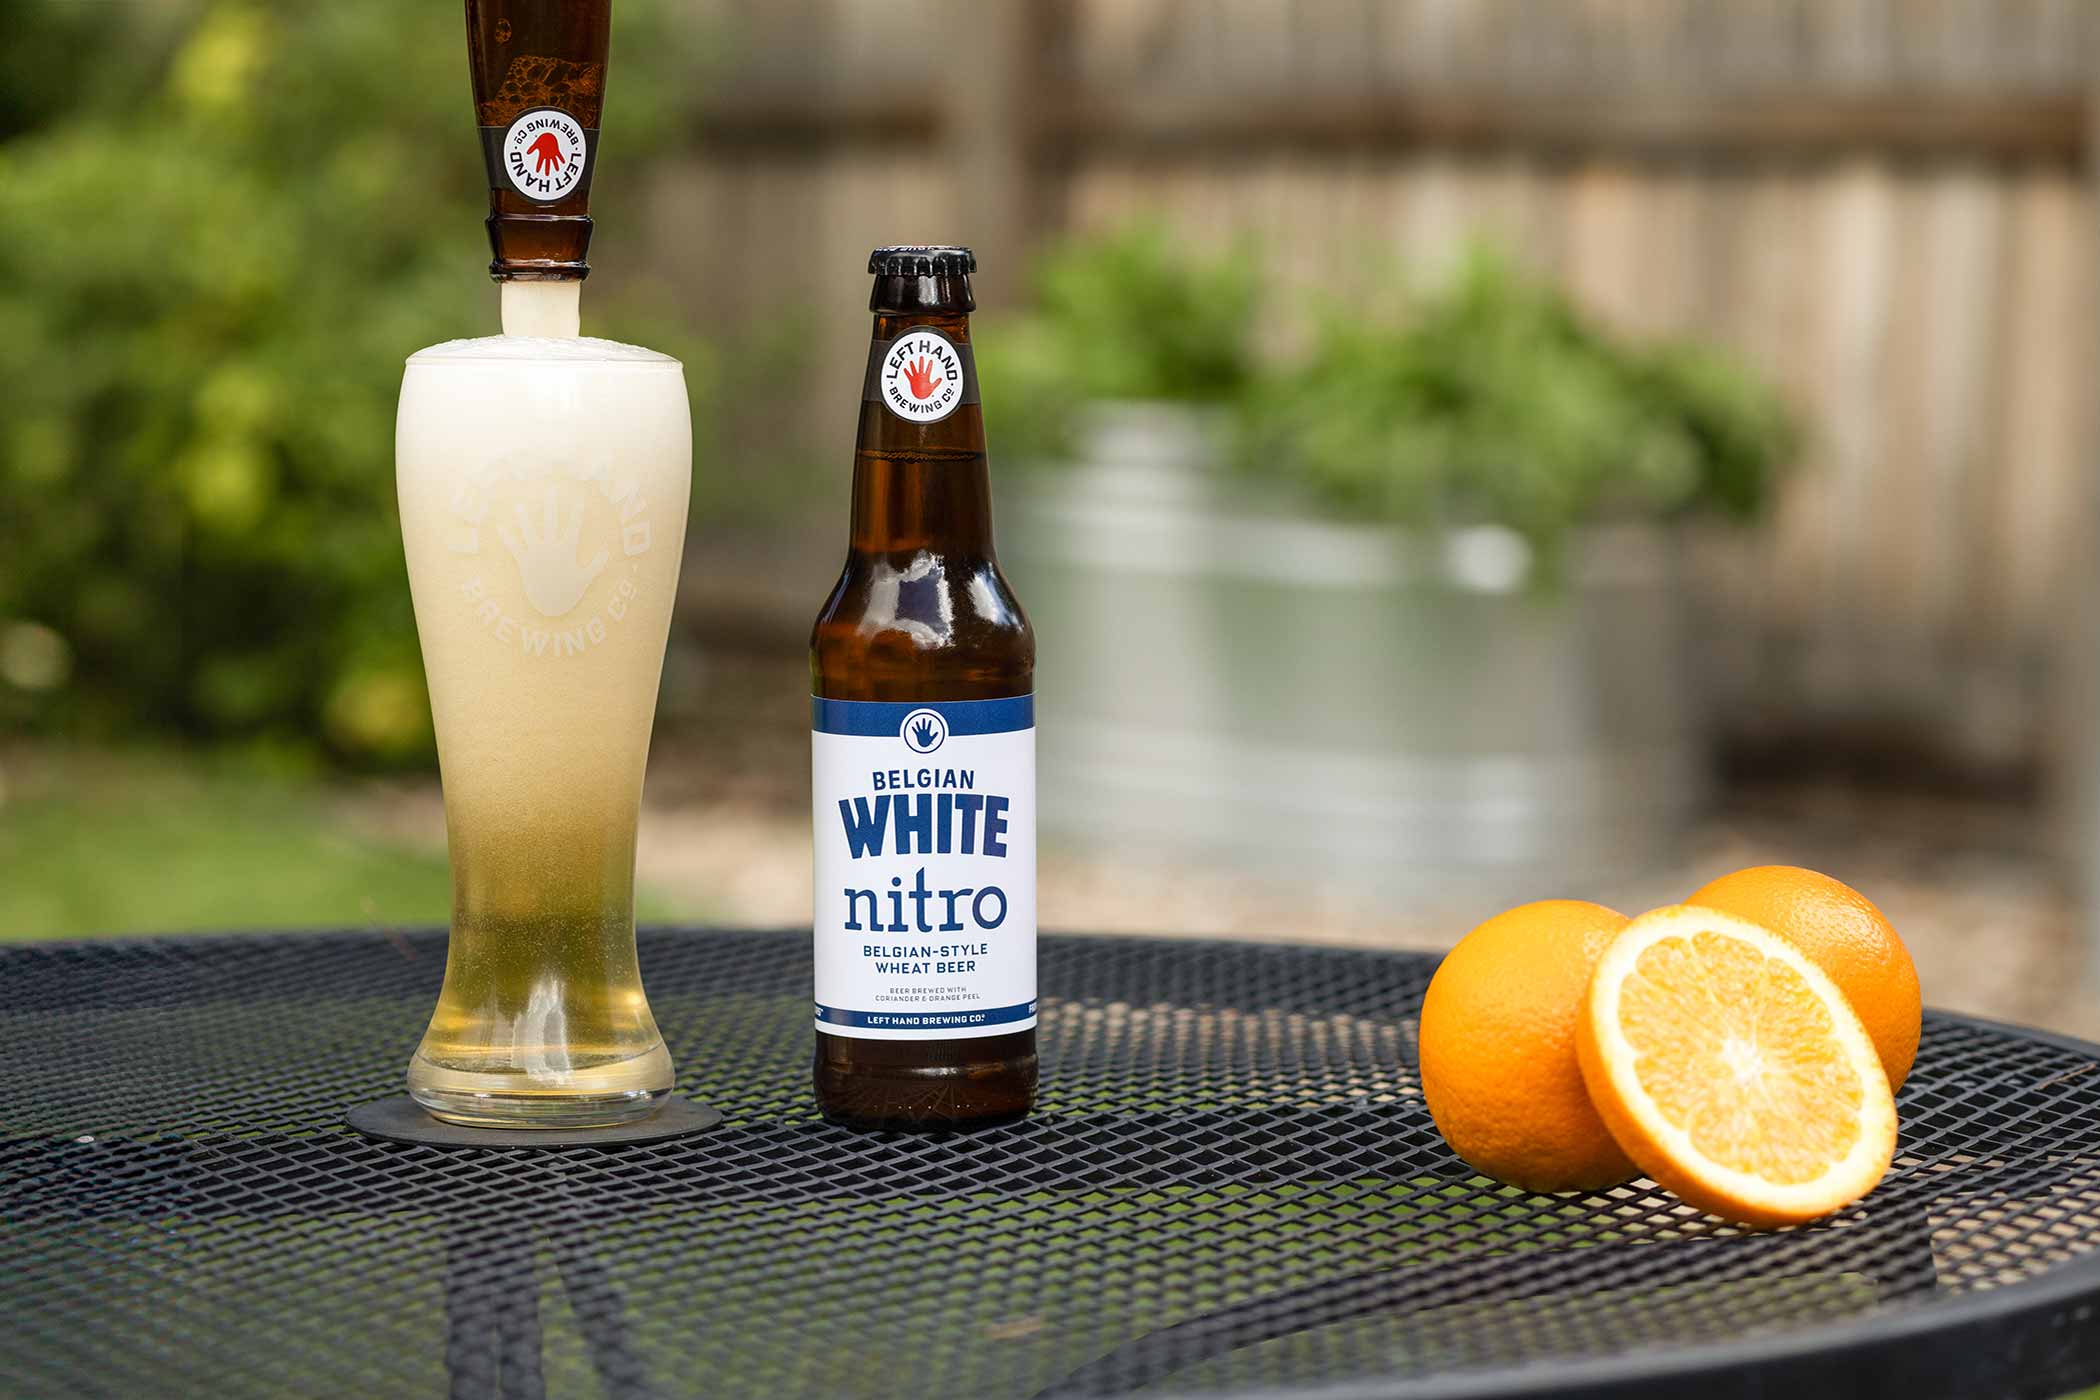 Why Left Hand Believes Its New Nitro Release Will Drink Best in Glass